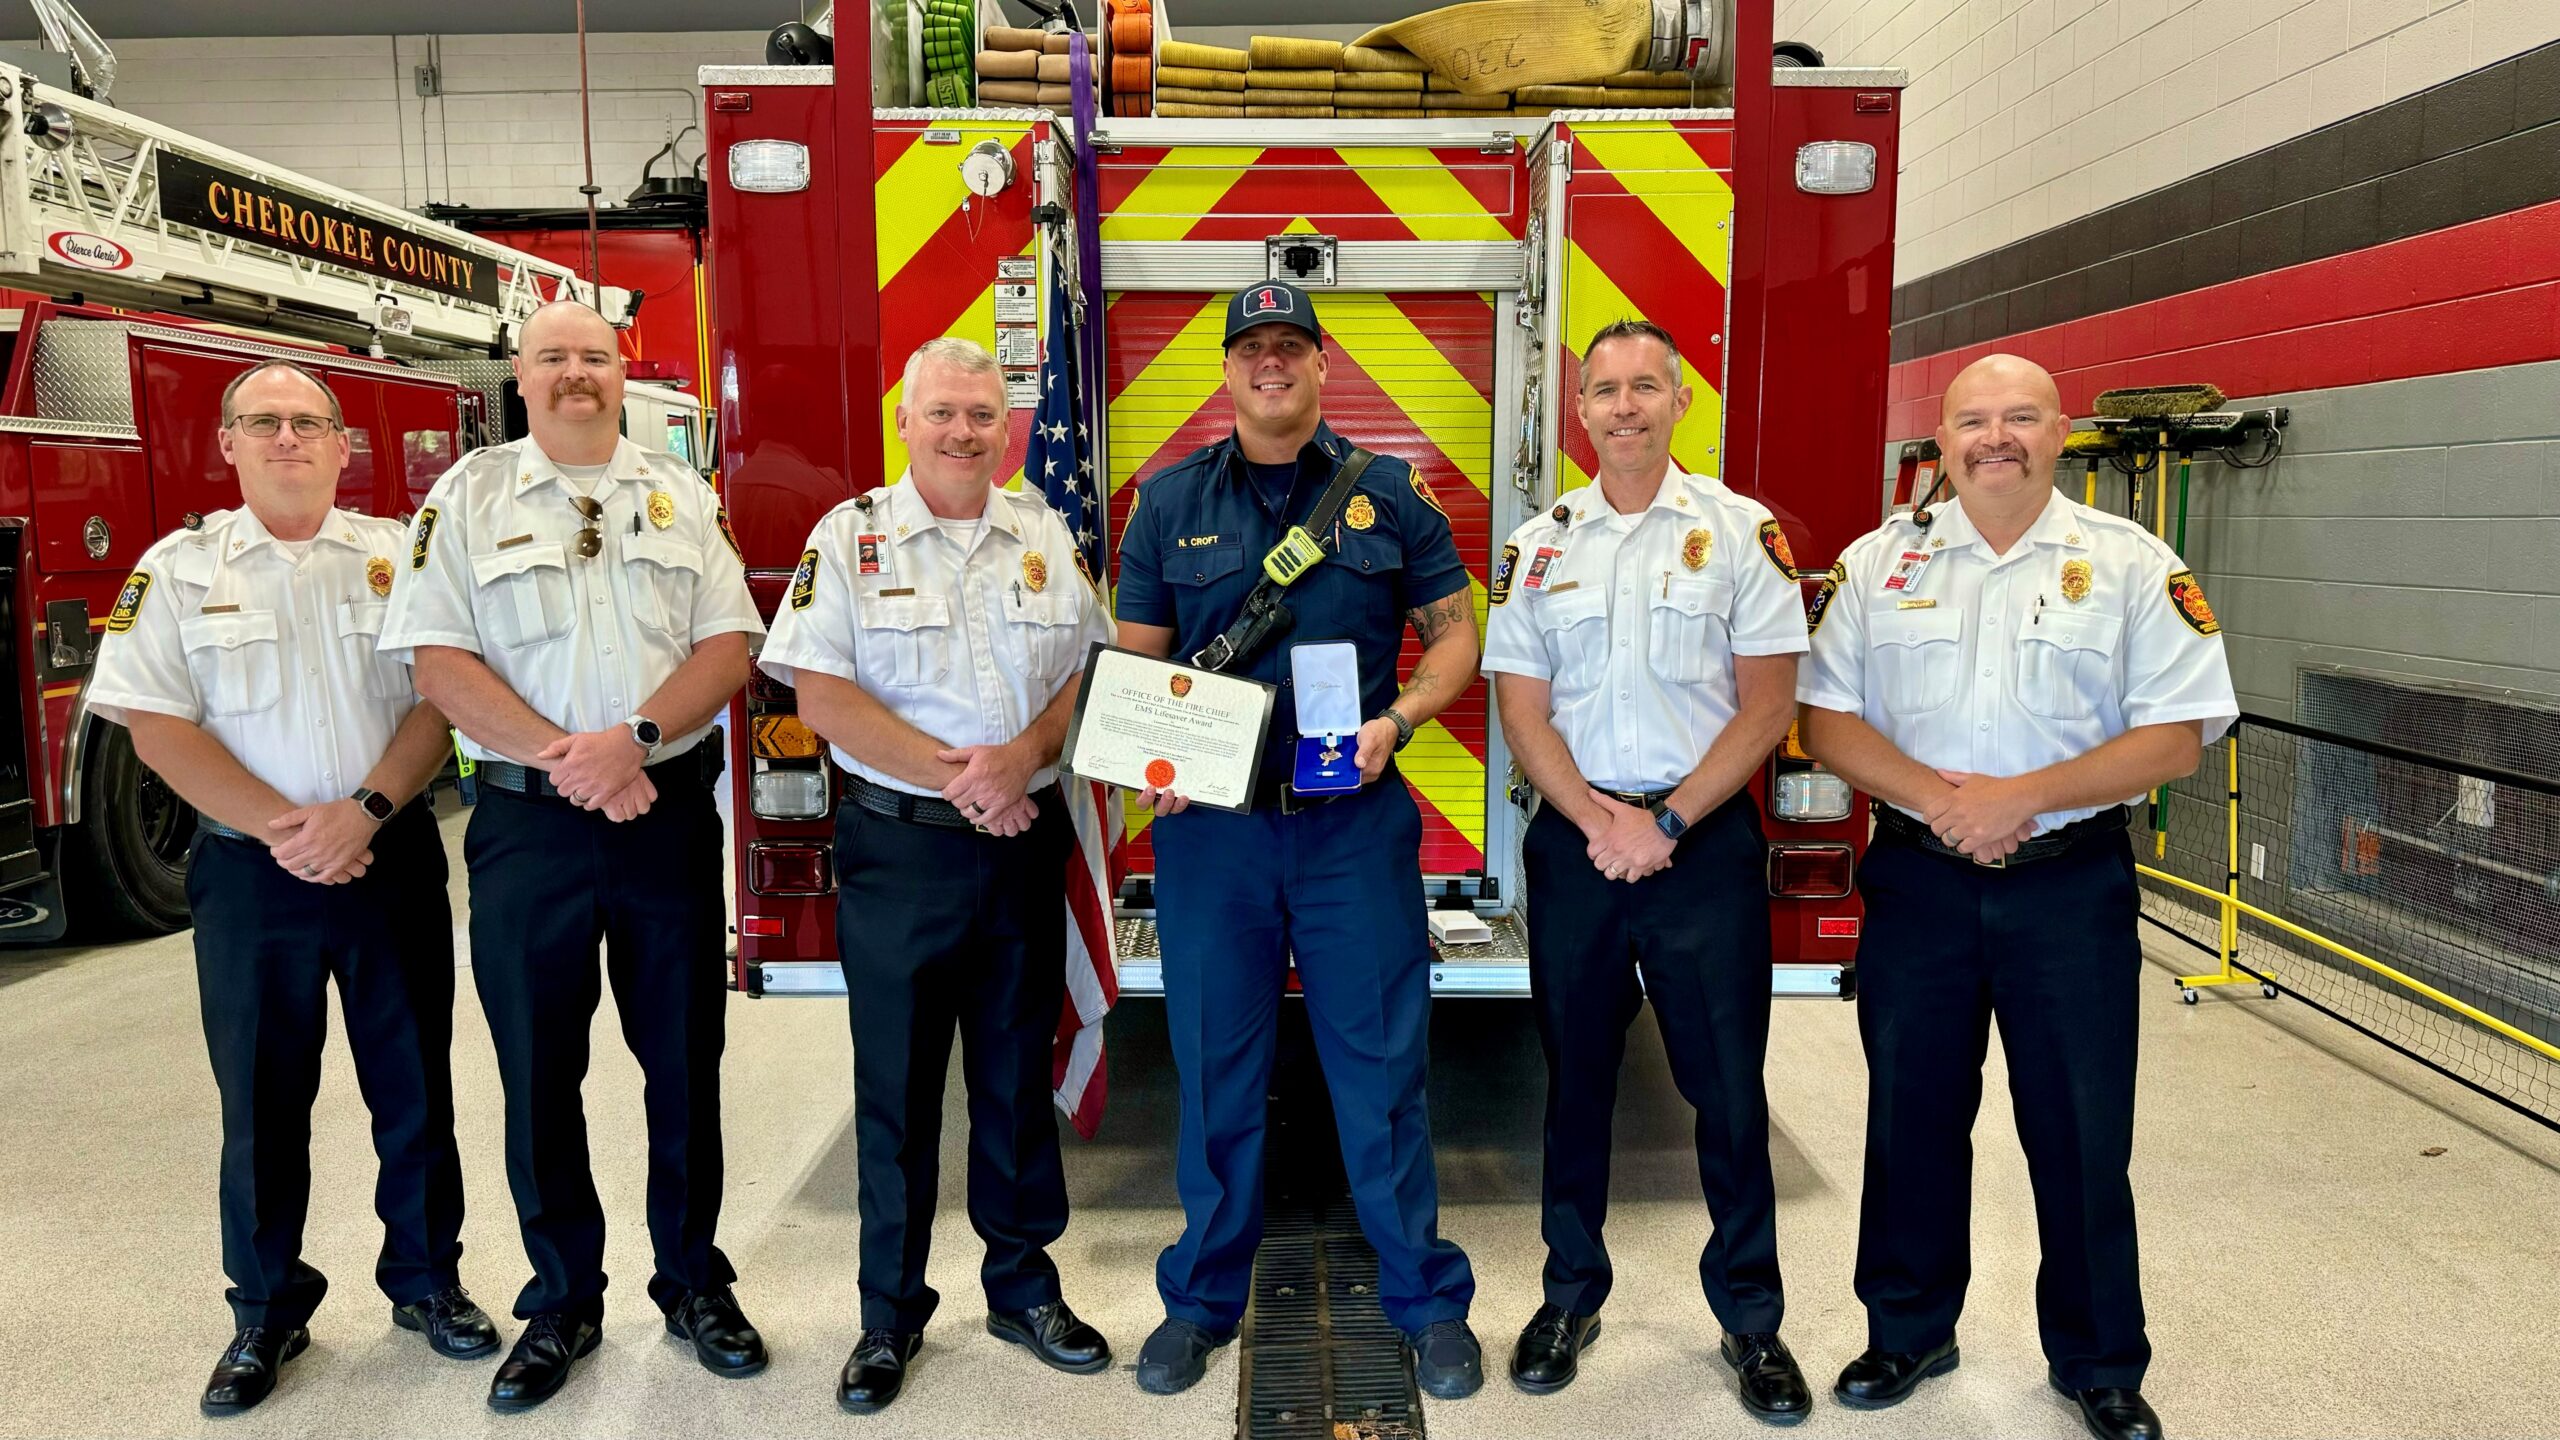 Cherokee County Firefighters Honored for Heroic Acts